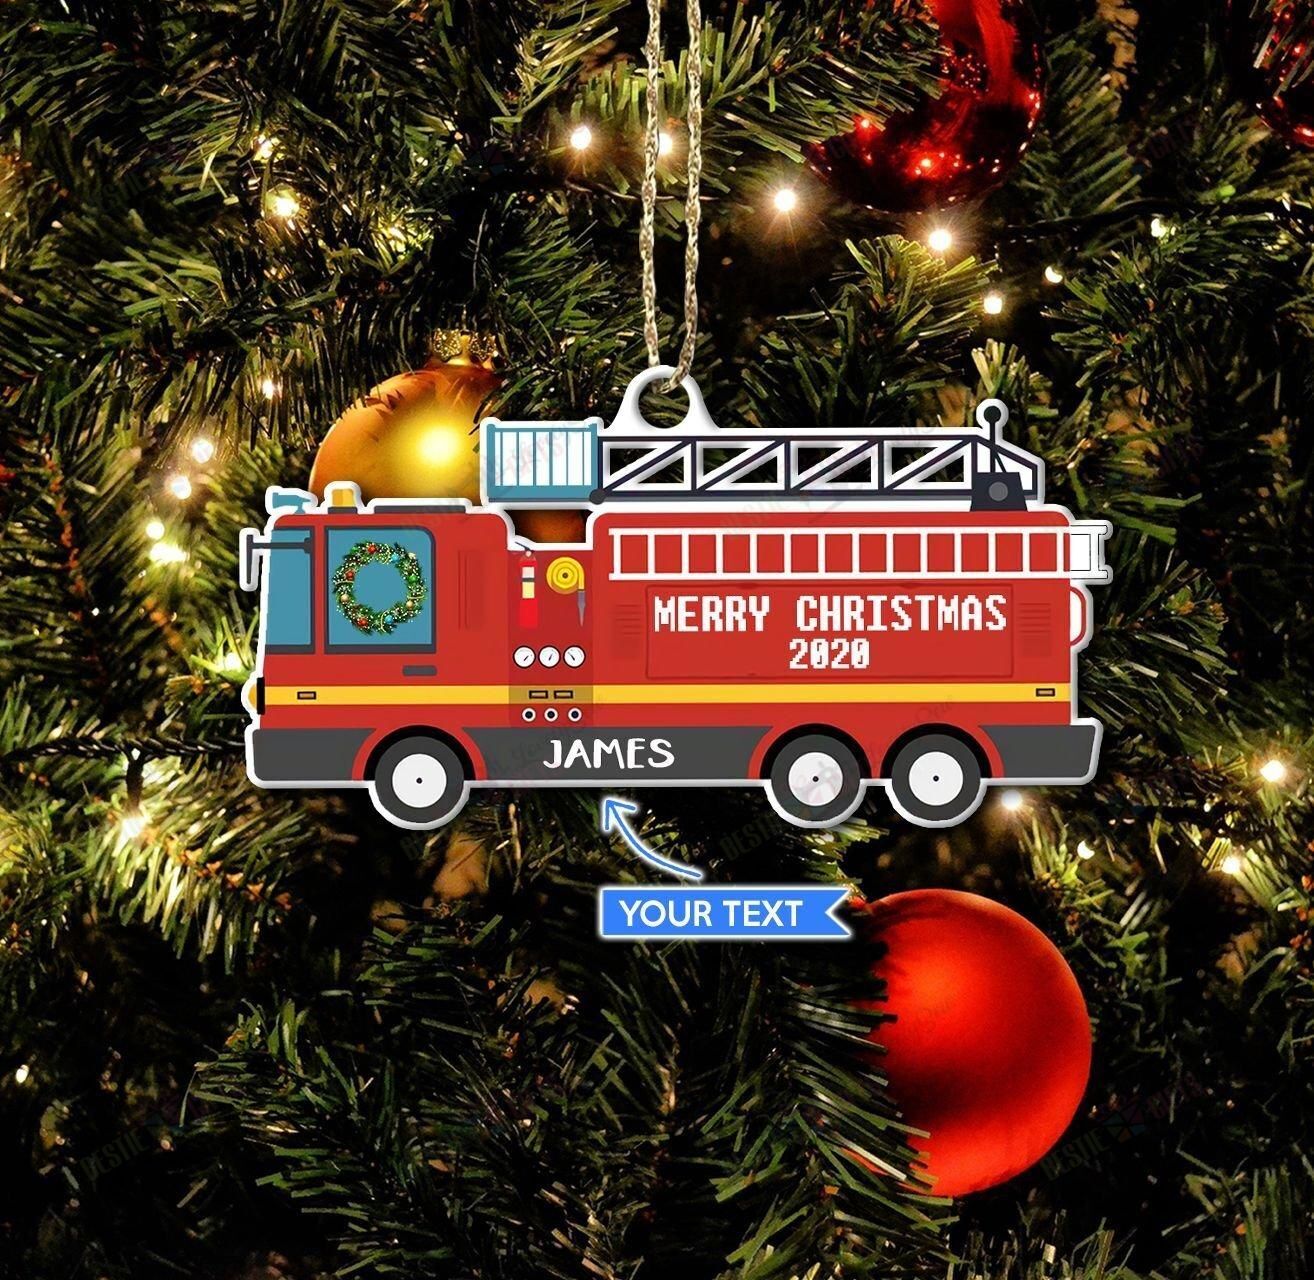 Details about   FIRETRUCK Christmas Ornaments  TRUCK LIMITED CUSTOM 